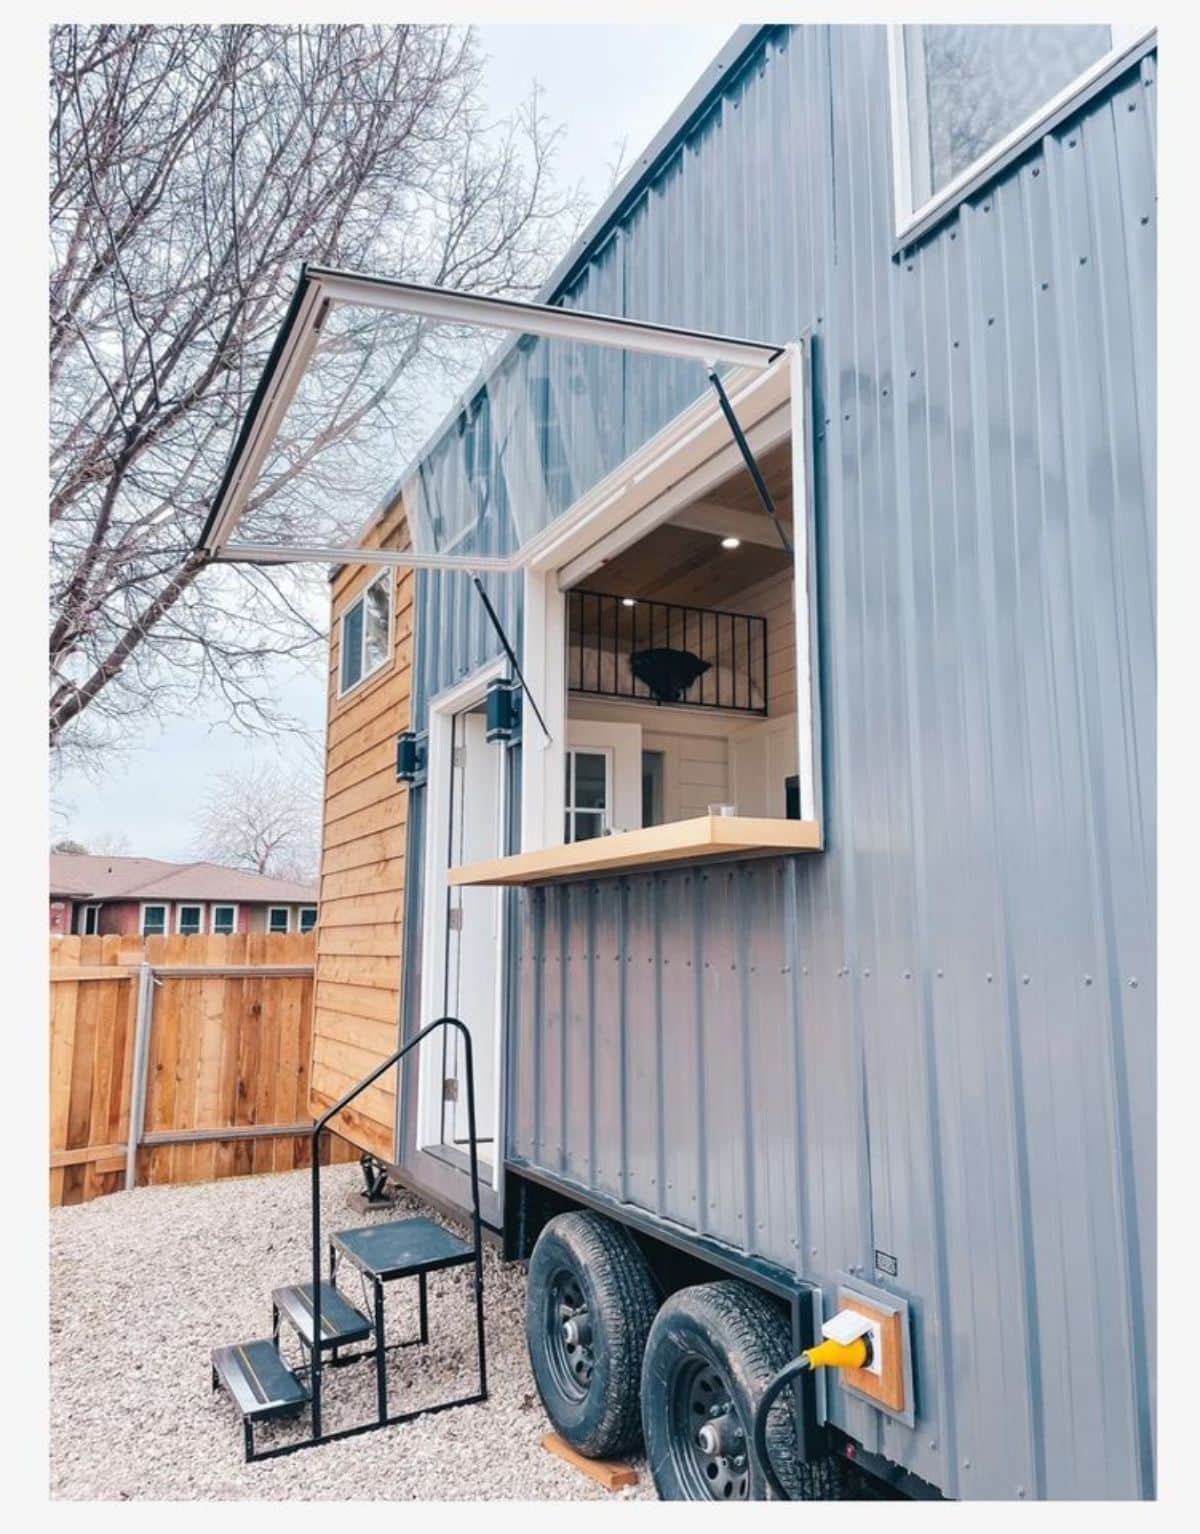 Main entrance view of Tiny Home with Financing